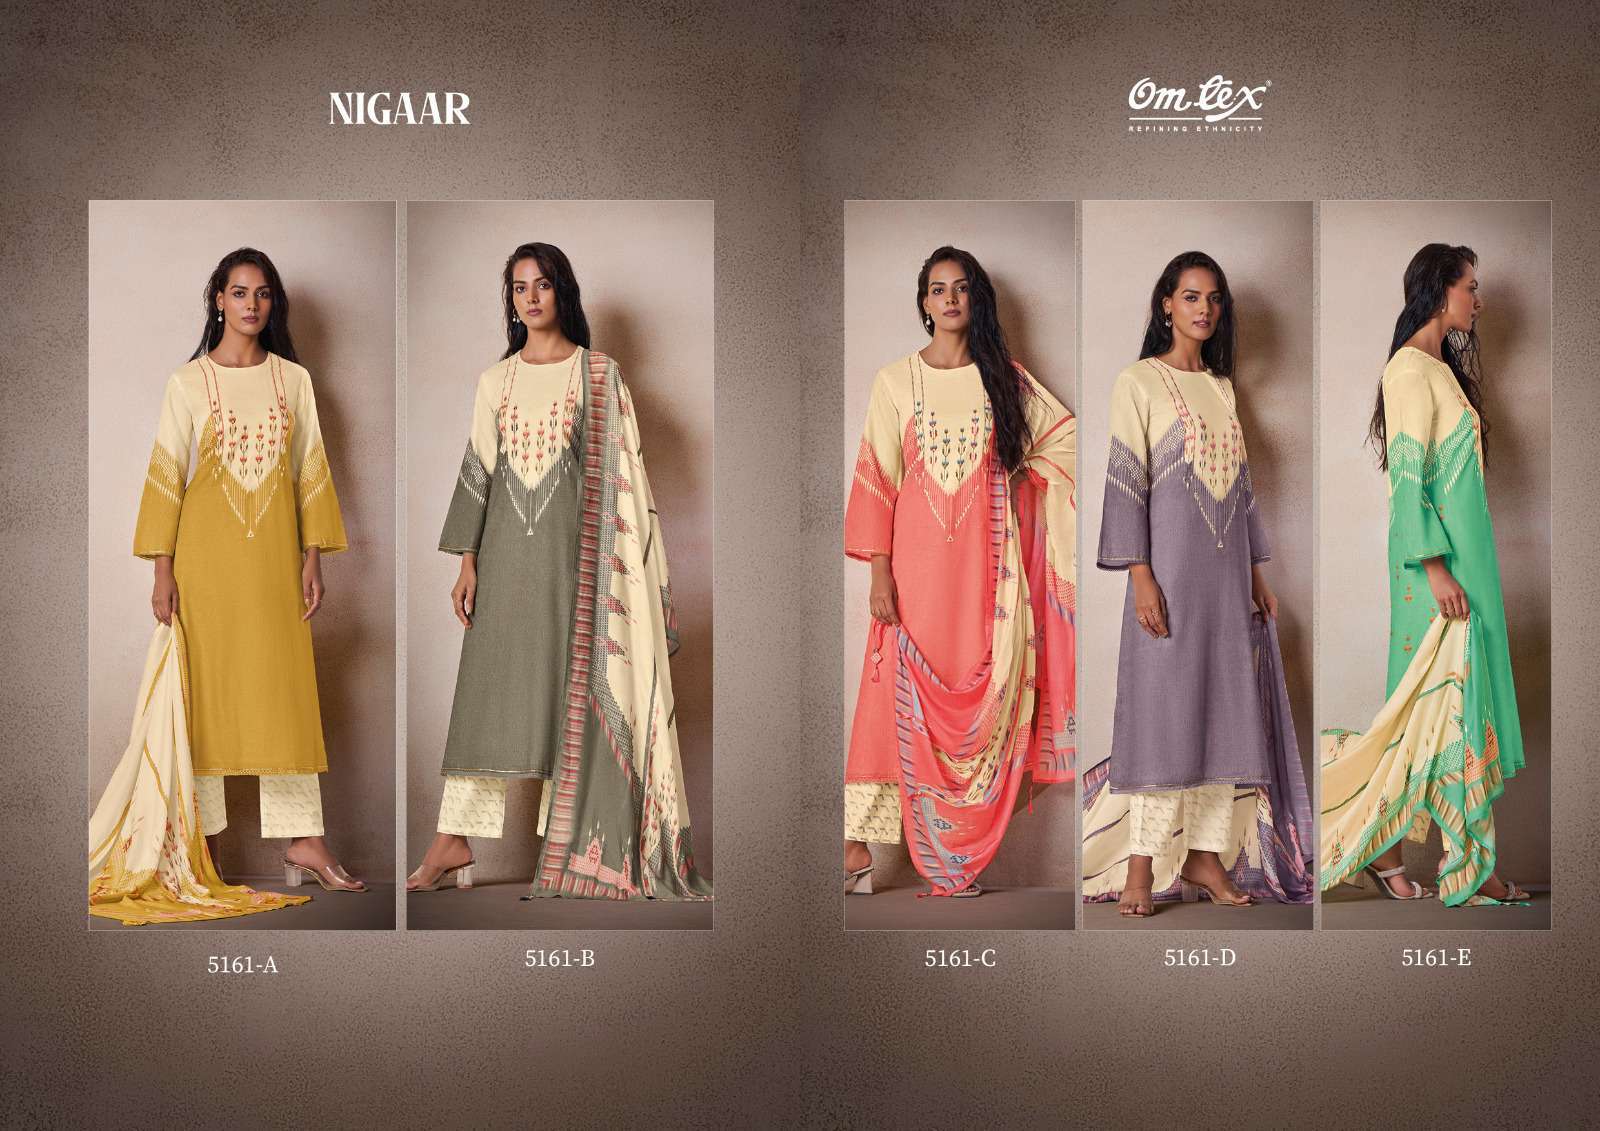 OMTEX NIGAAR Salwar suits catalogue with price